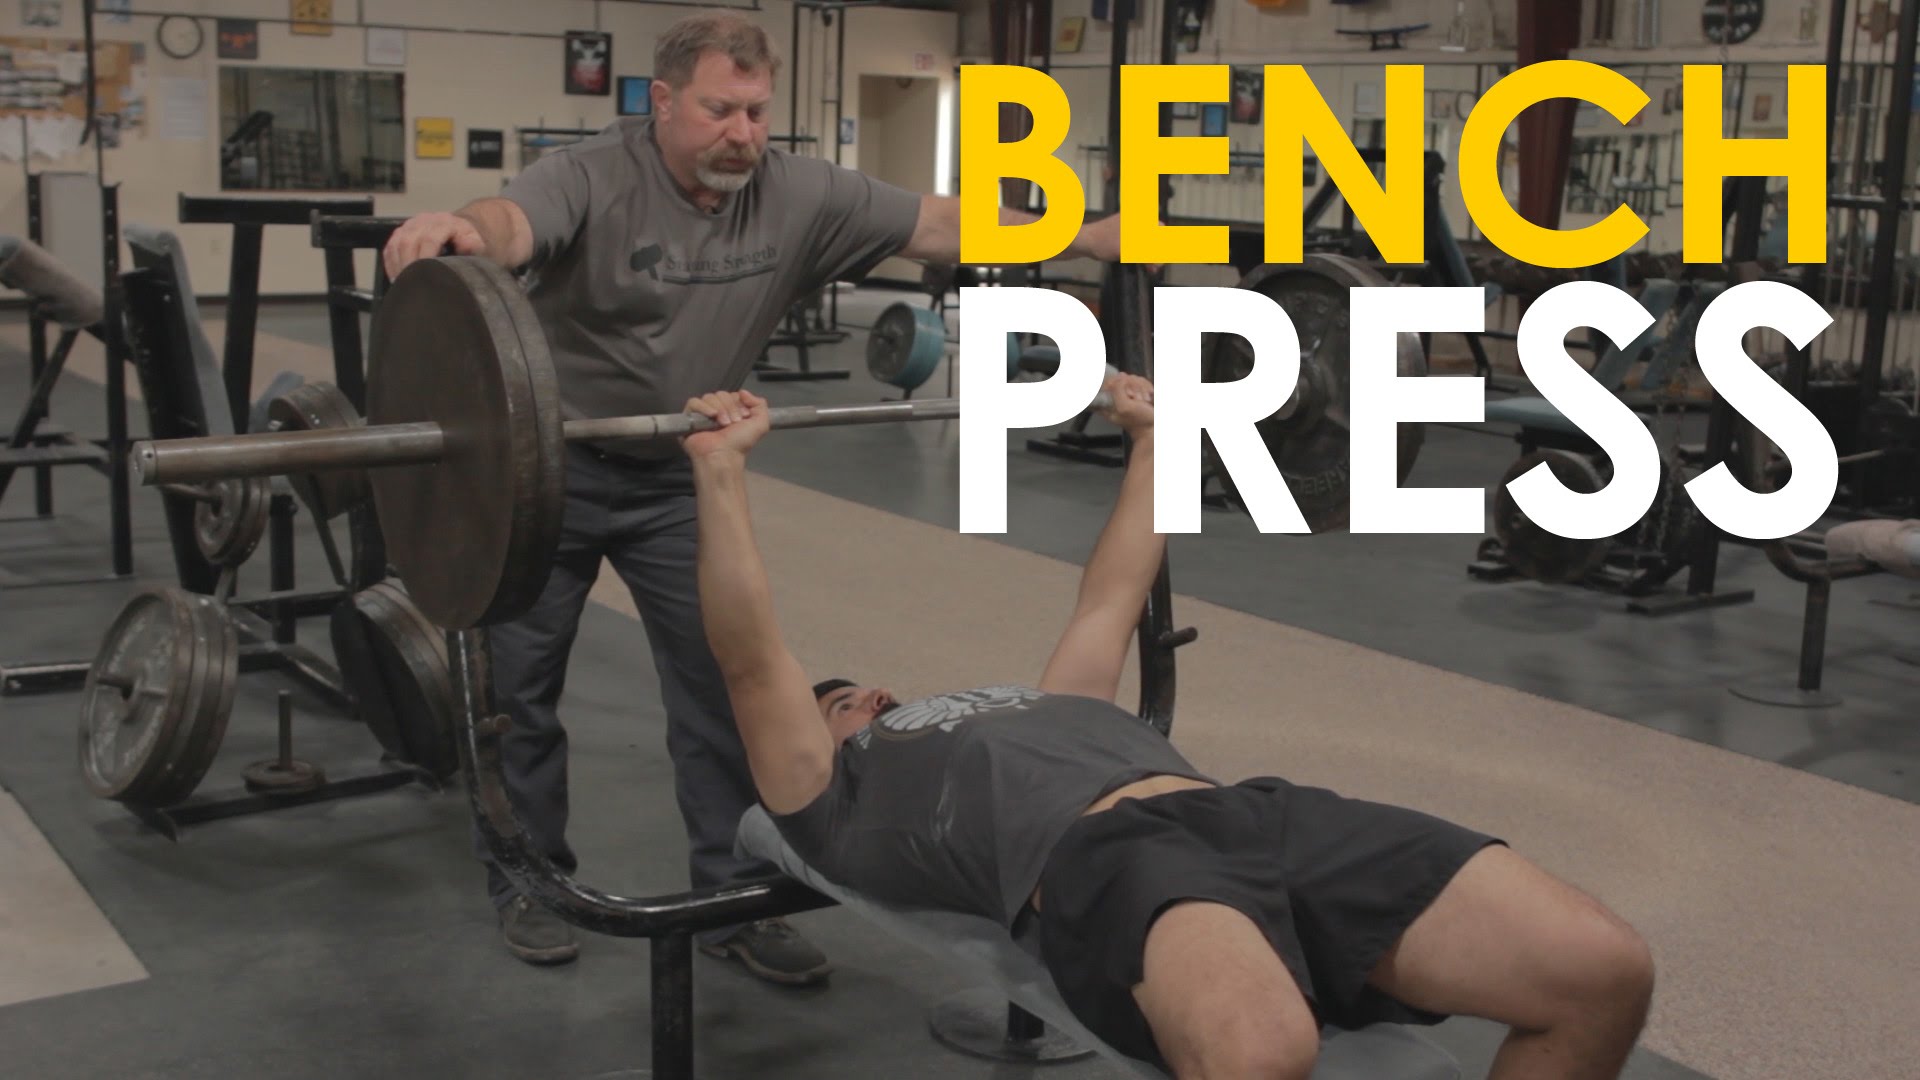 A man, bench pressing at the gym.